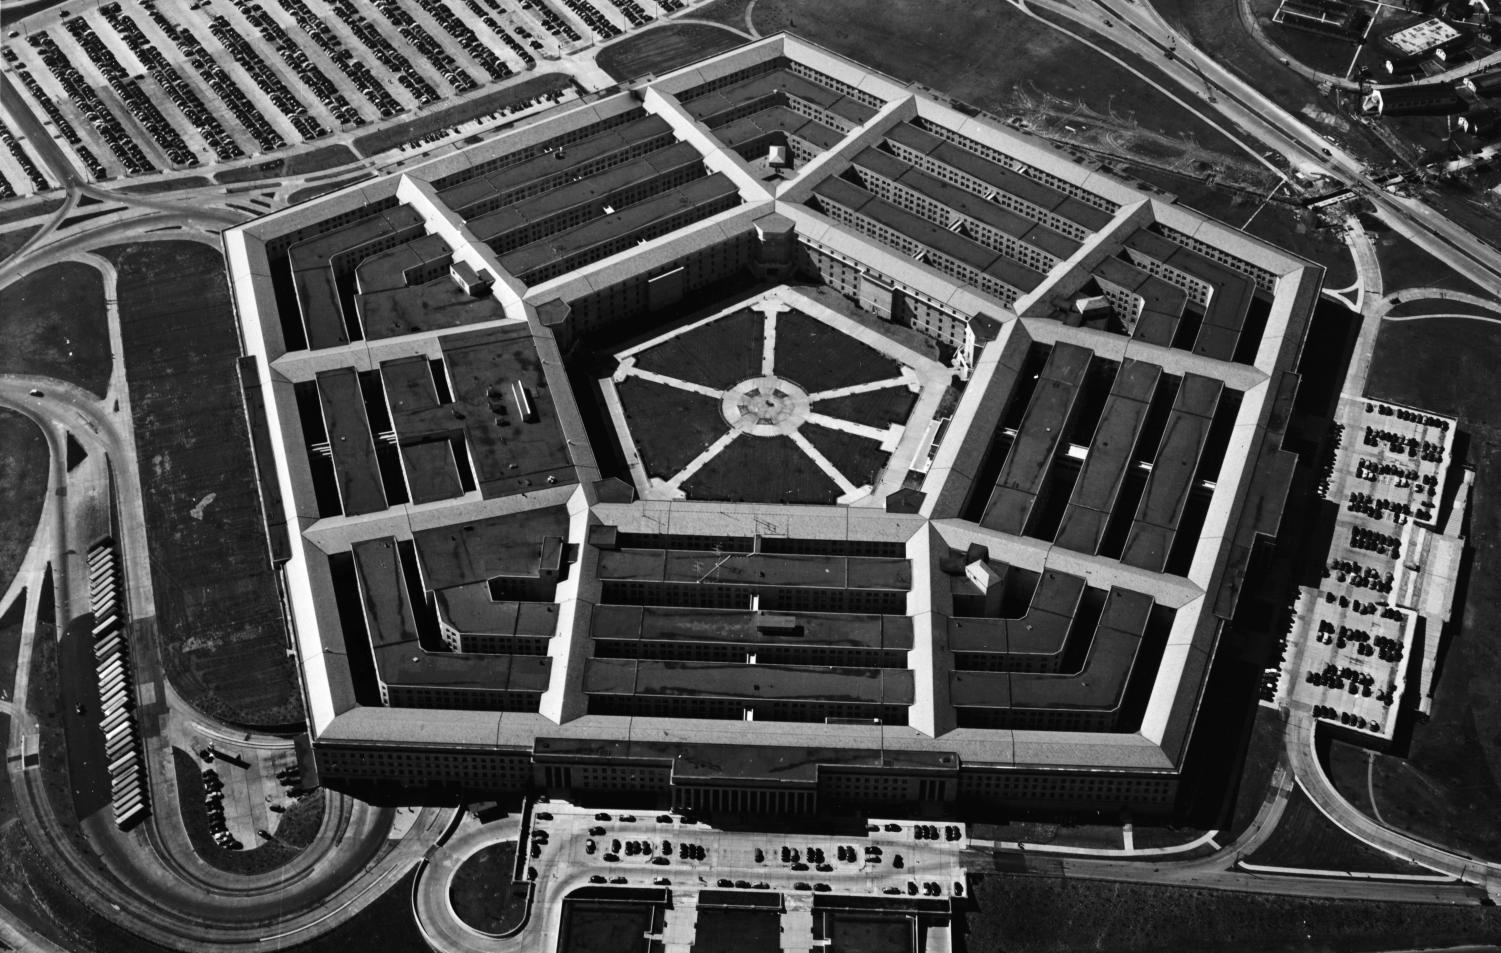 Pentagon Document Leaks Appeared on 'Minecraft' Discord Server: Report